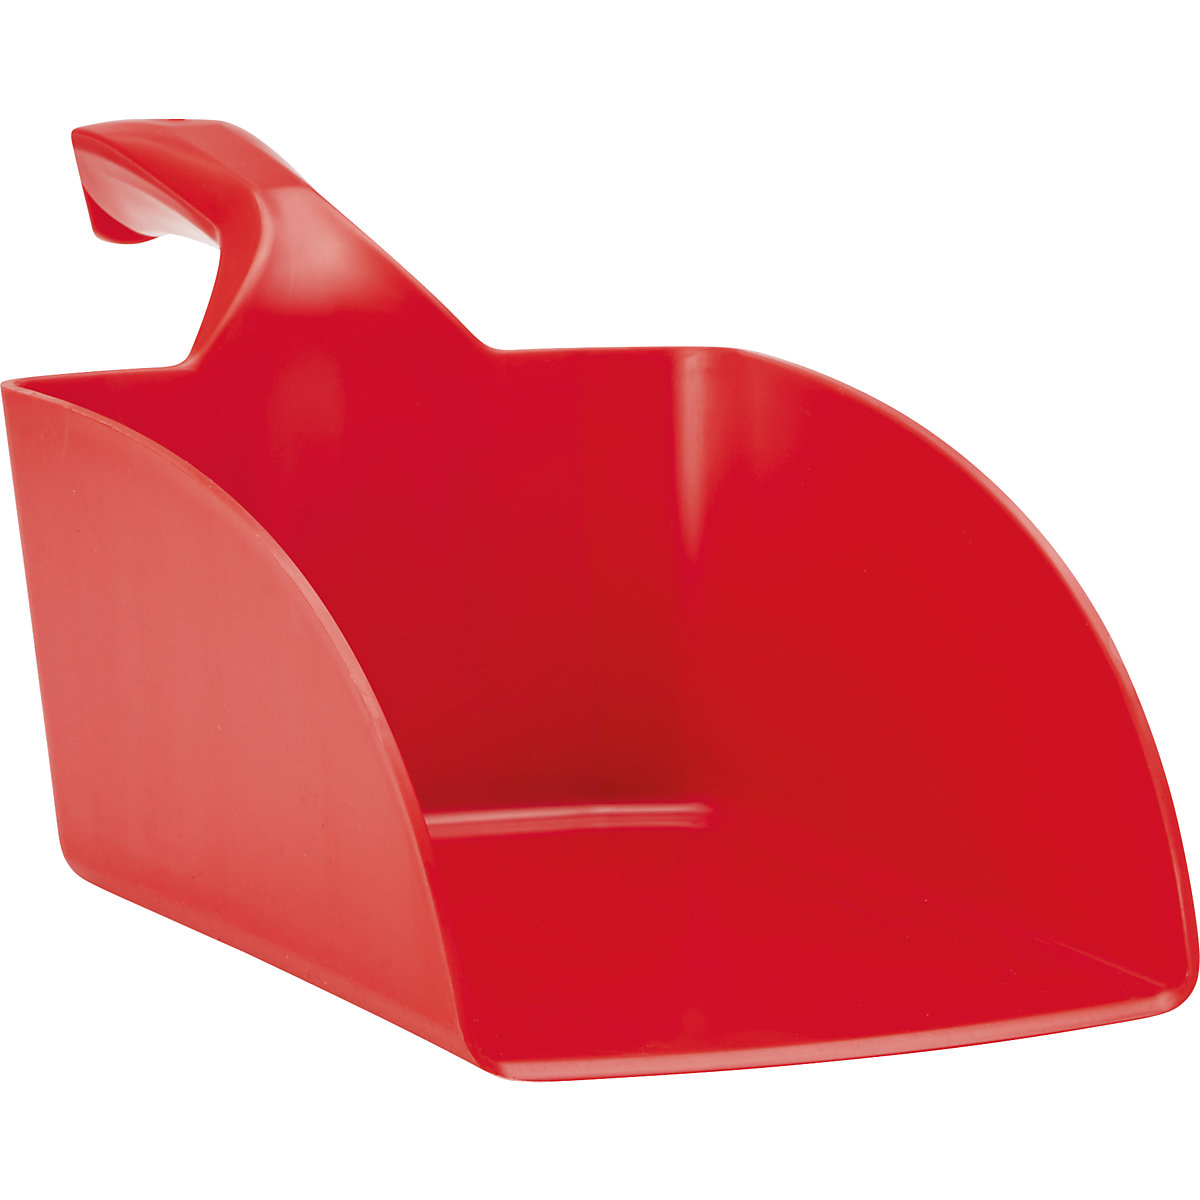 Hand shovel, suitable for foodstuffs – Vikan, capacity 2 l, pack of 10, red